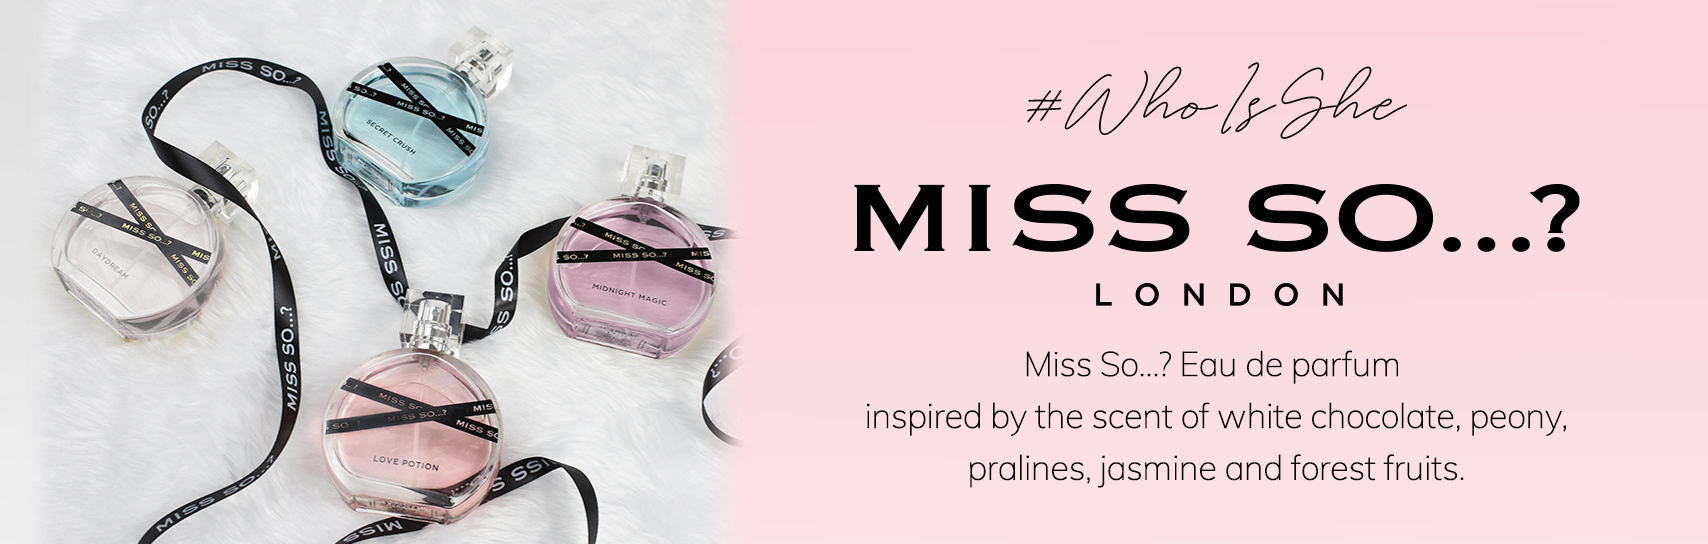 [Miss So...? - products]